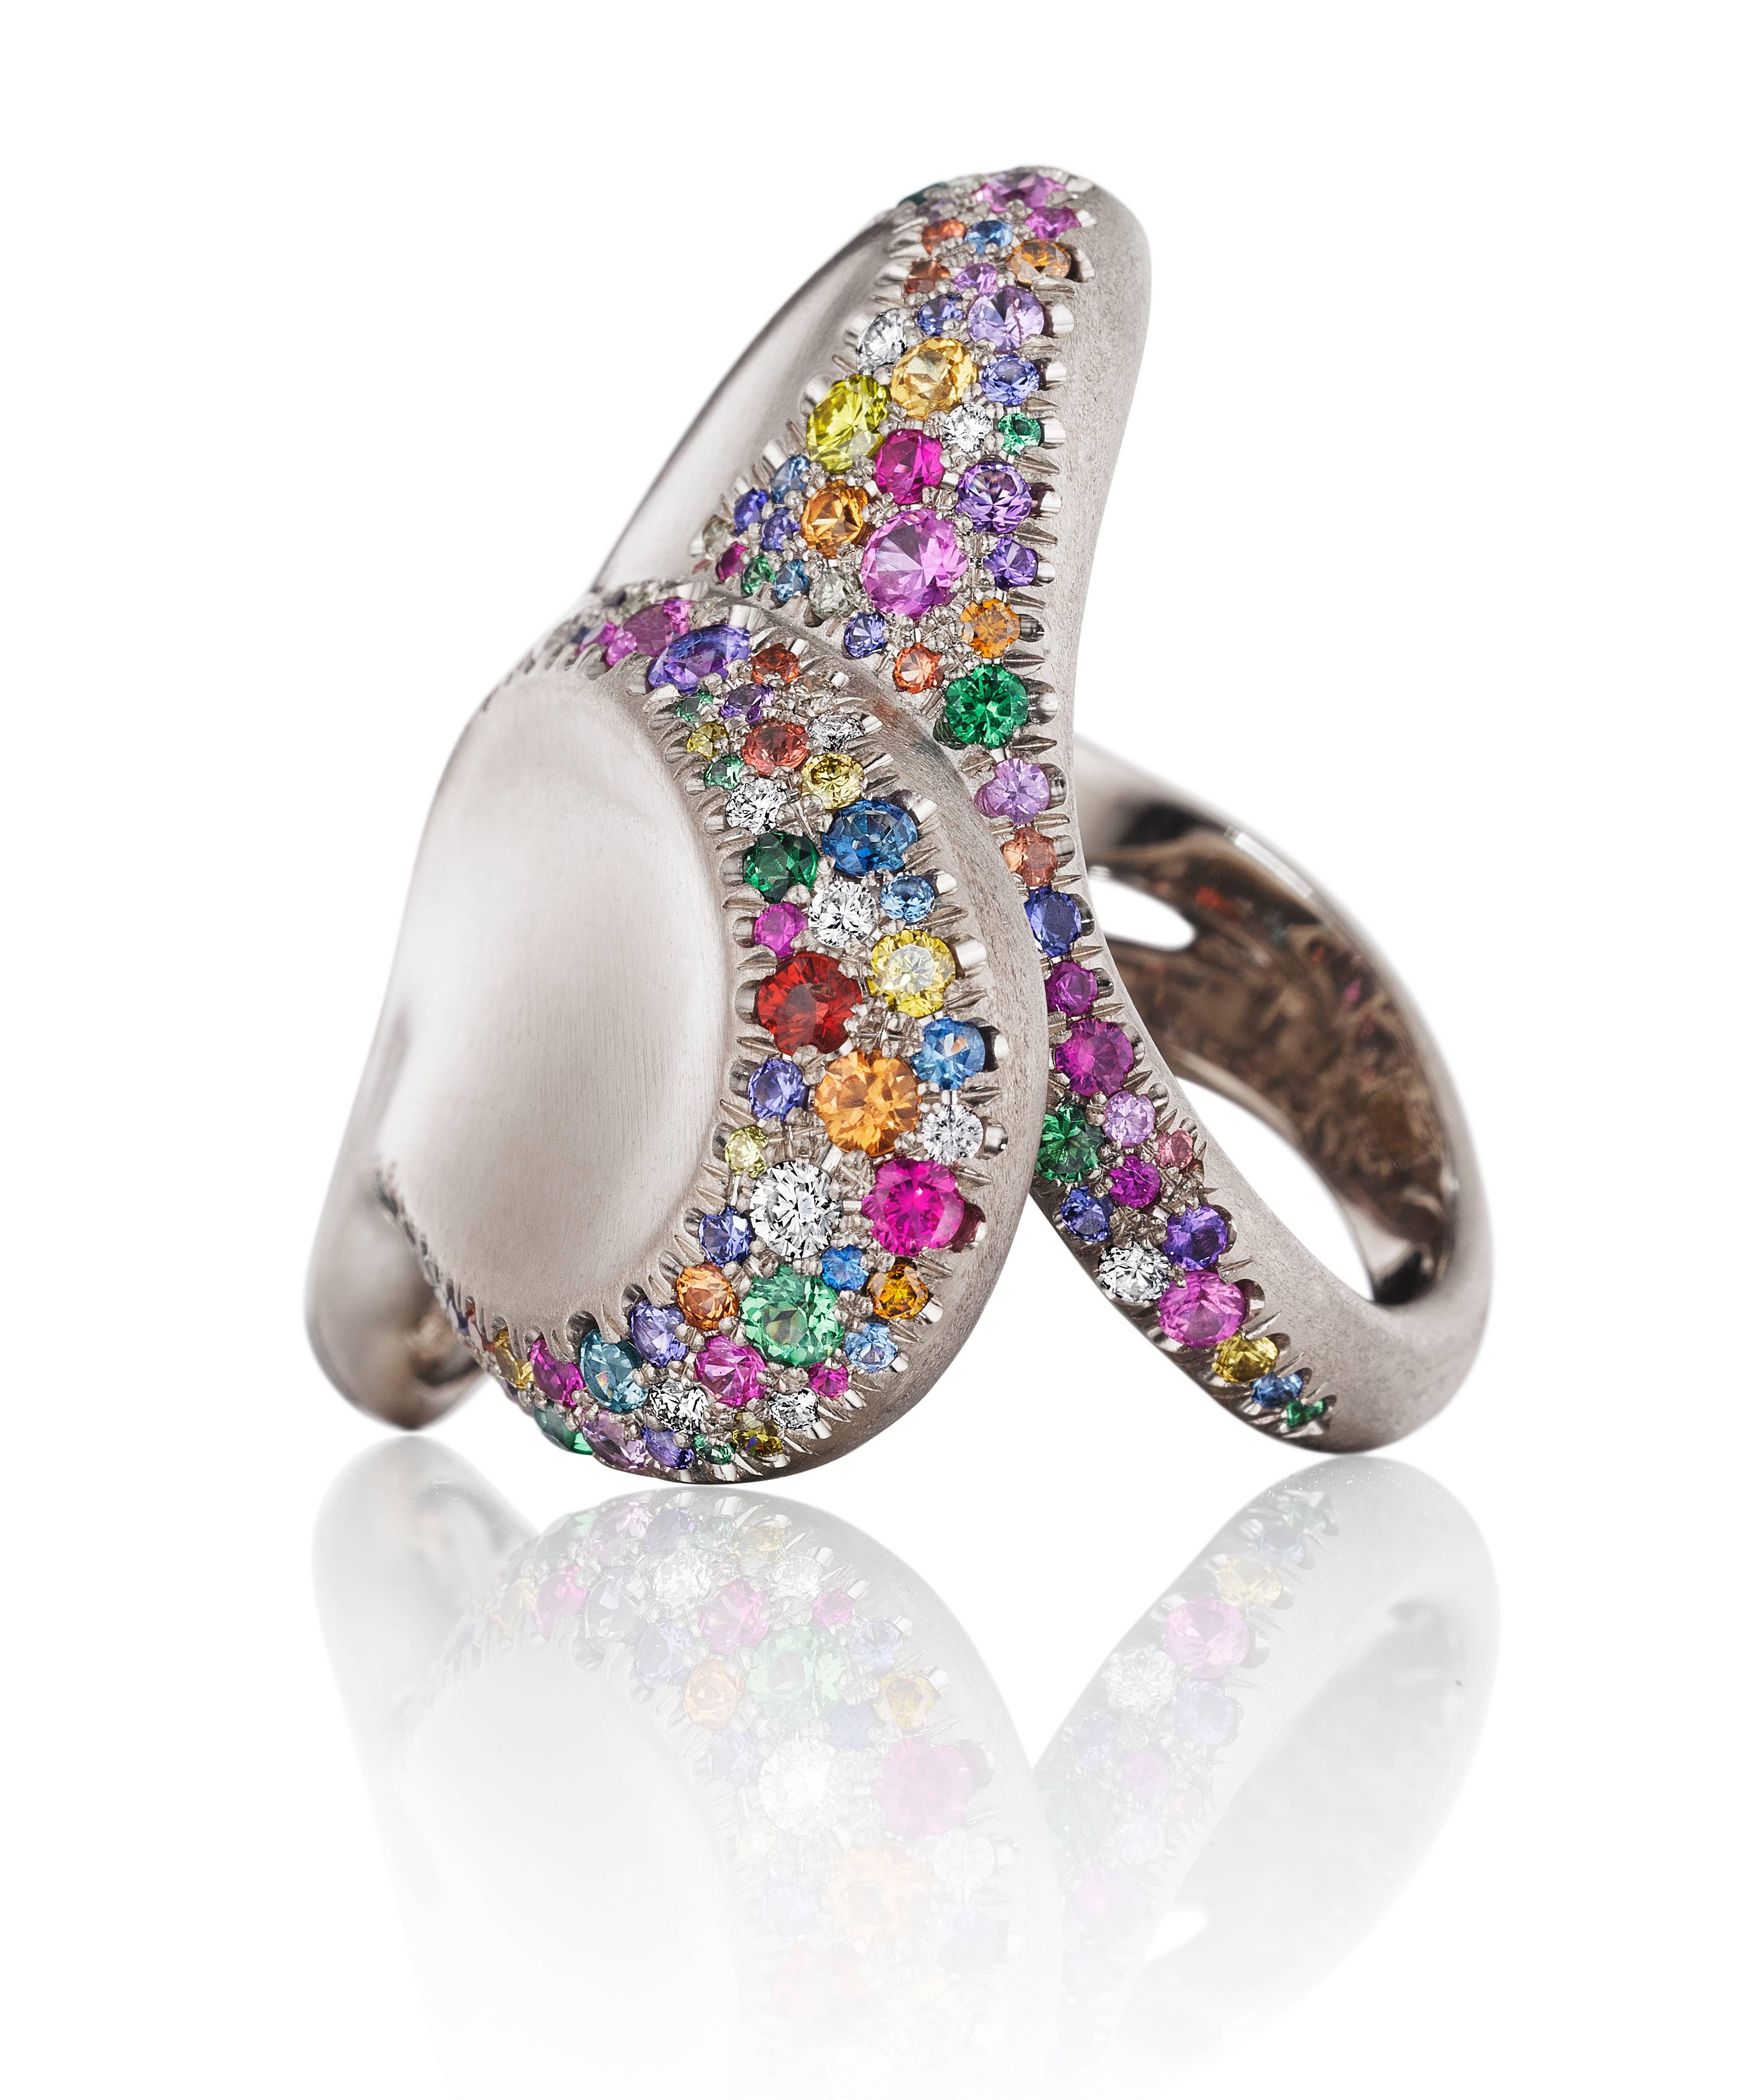 Naomi's award winning Confetti Heart Ring which was recently on display at the AGTA Spectrum Awards Gala.

An exuberance of joy and color. The Confetti Heart Ring leaps into sophisticated extravagance. Made entirely of natural 18K white gold with